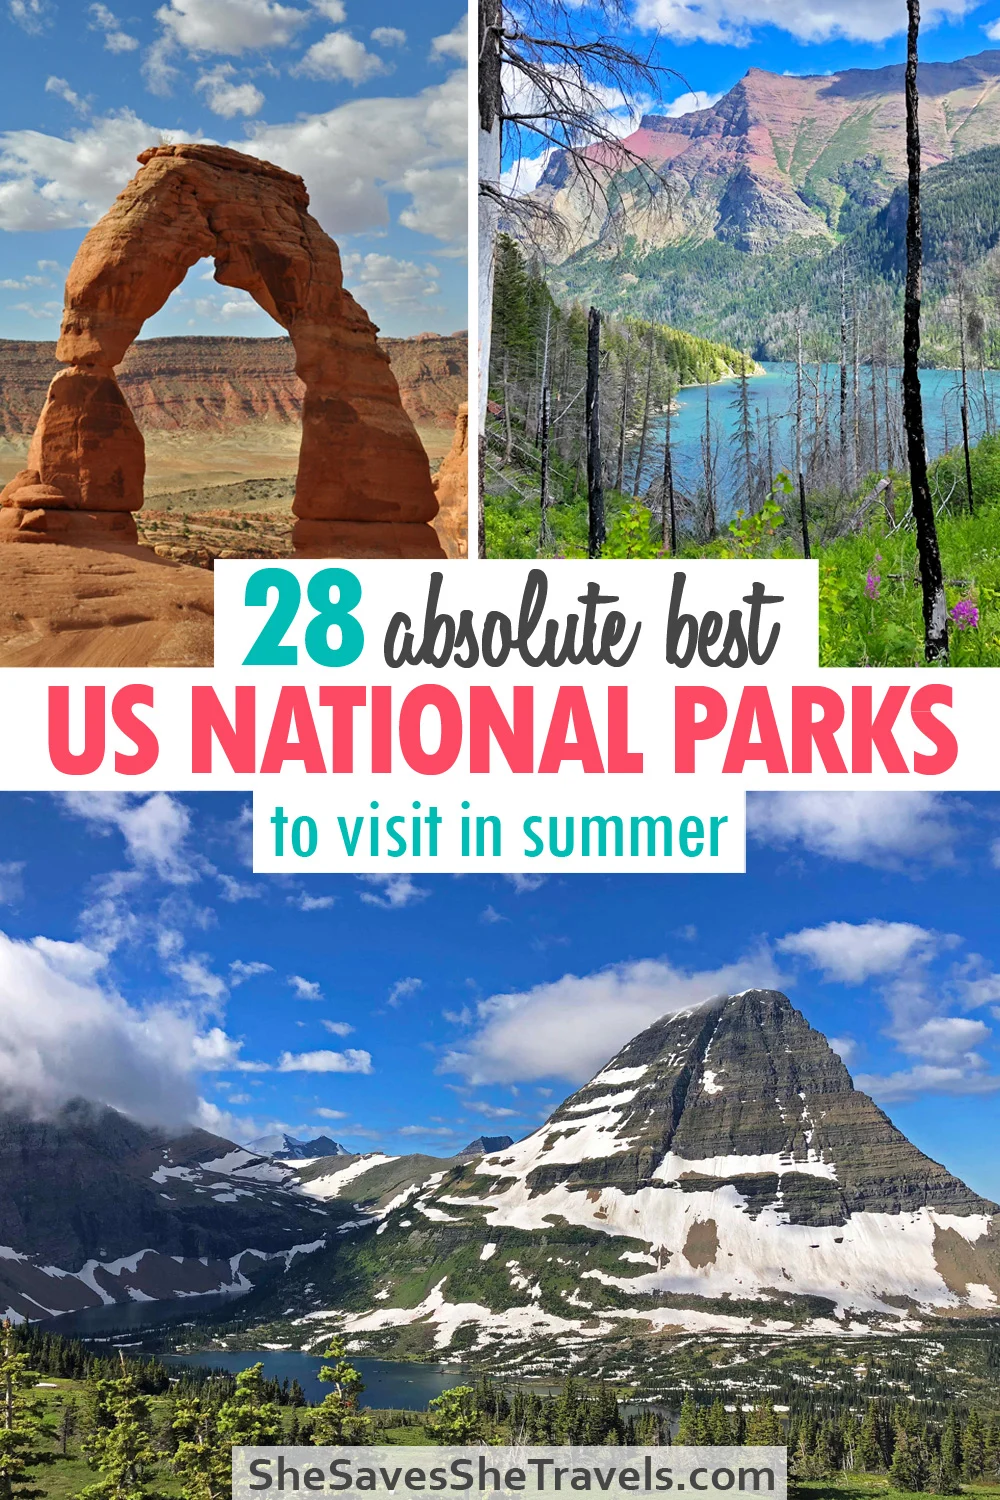 28 absolute best us national parks to visit in summer